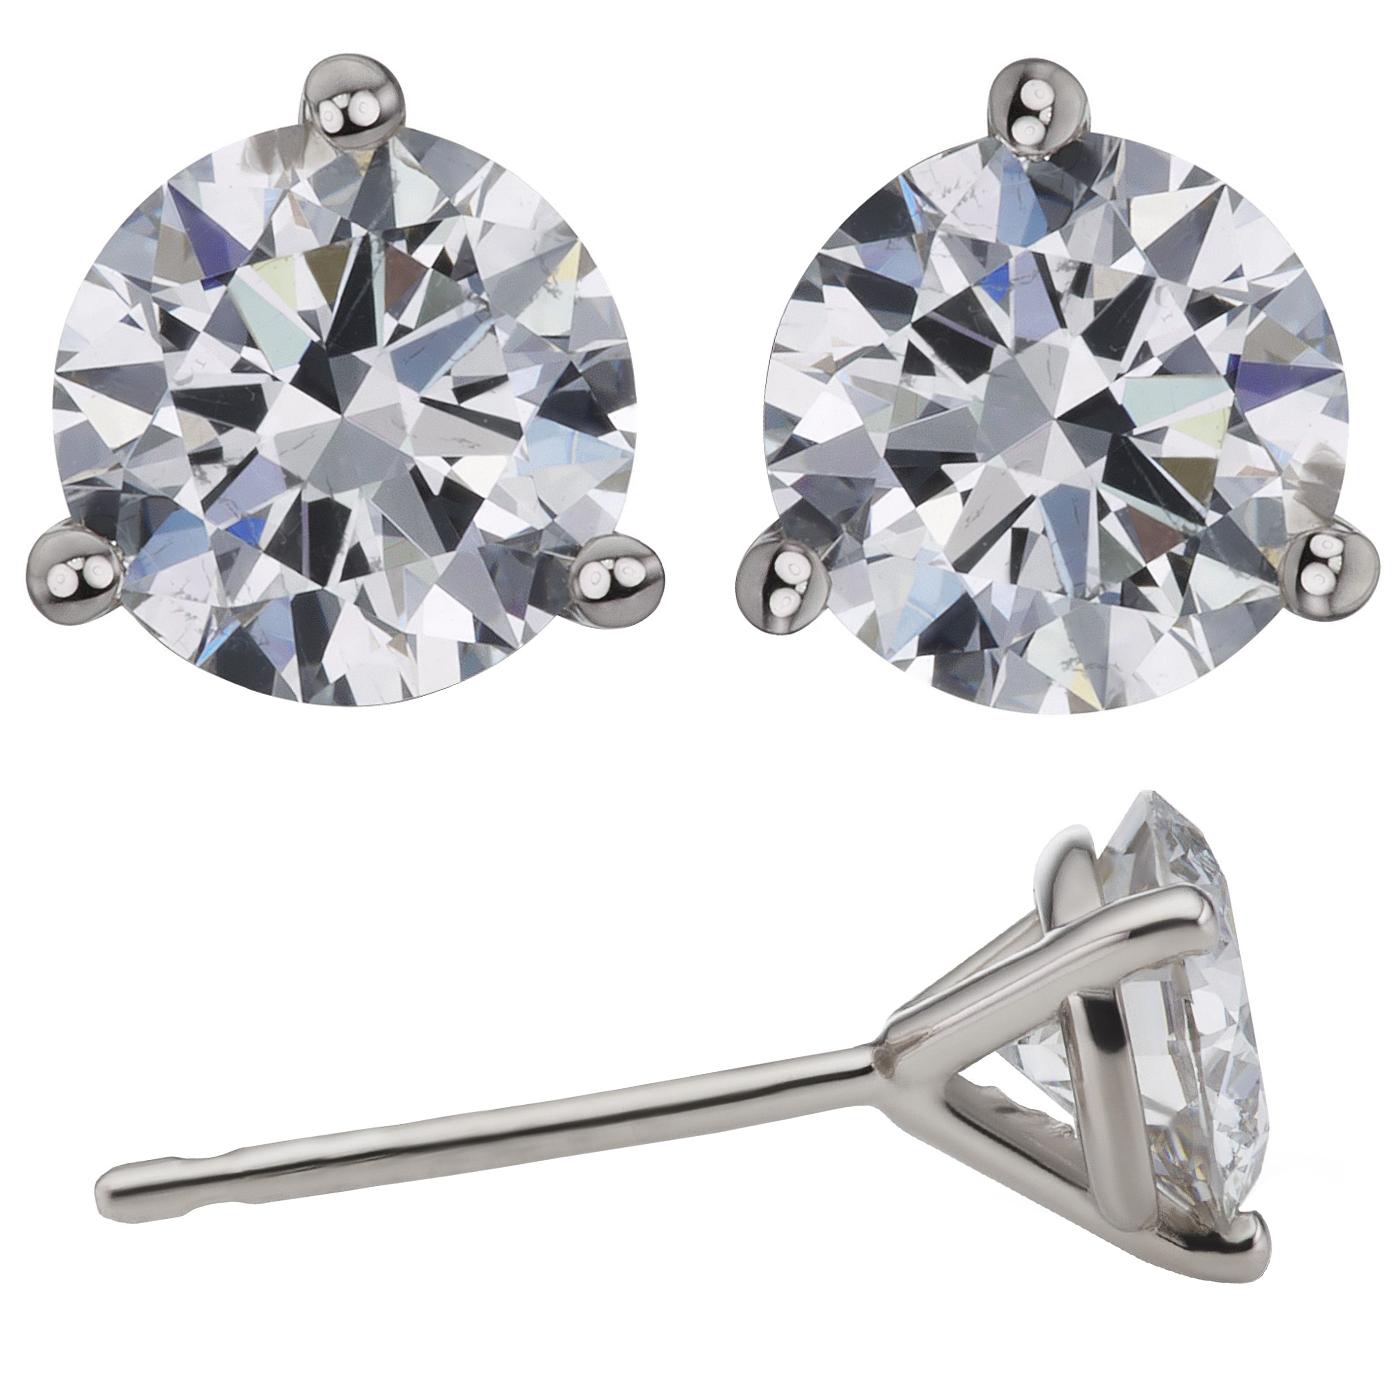 Beautiful 3.01ct Diamond Stud Earrings in 14K White Gold to make a statement with your look. You shall need stud earrings to make a statement with your look. These earrings create a sparkling, luxurious look featuring round-cut diamonds. This